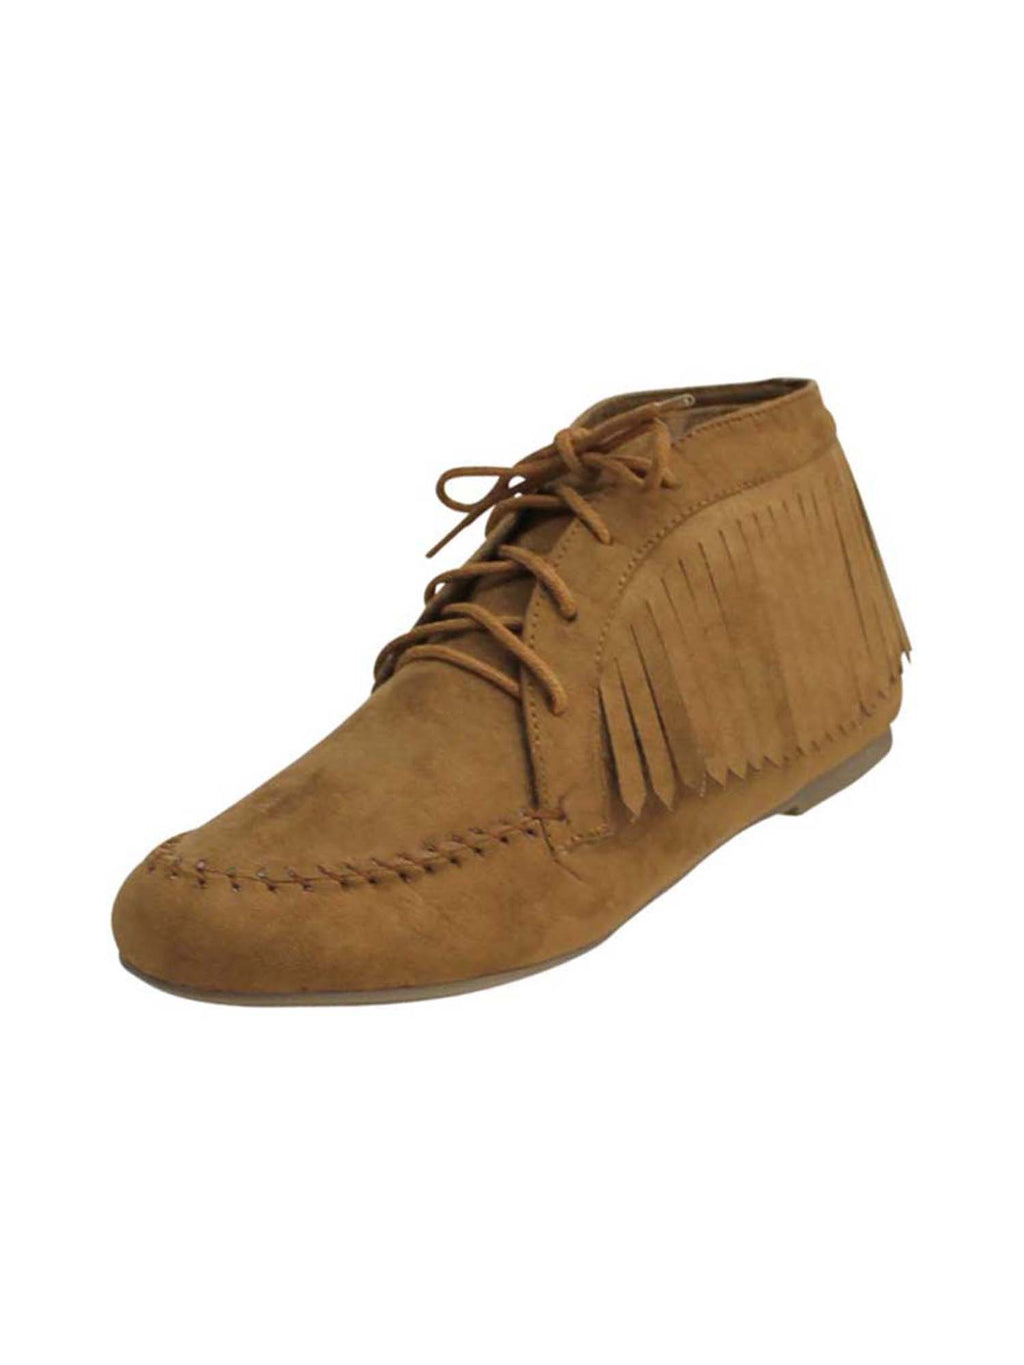 Women's Fringed Moccasin Ankle Booties